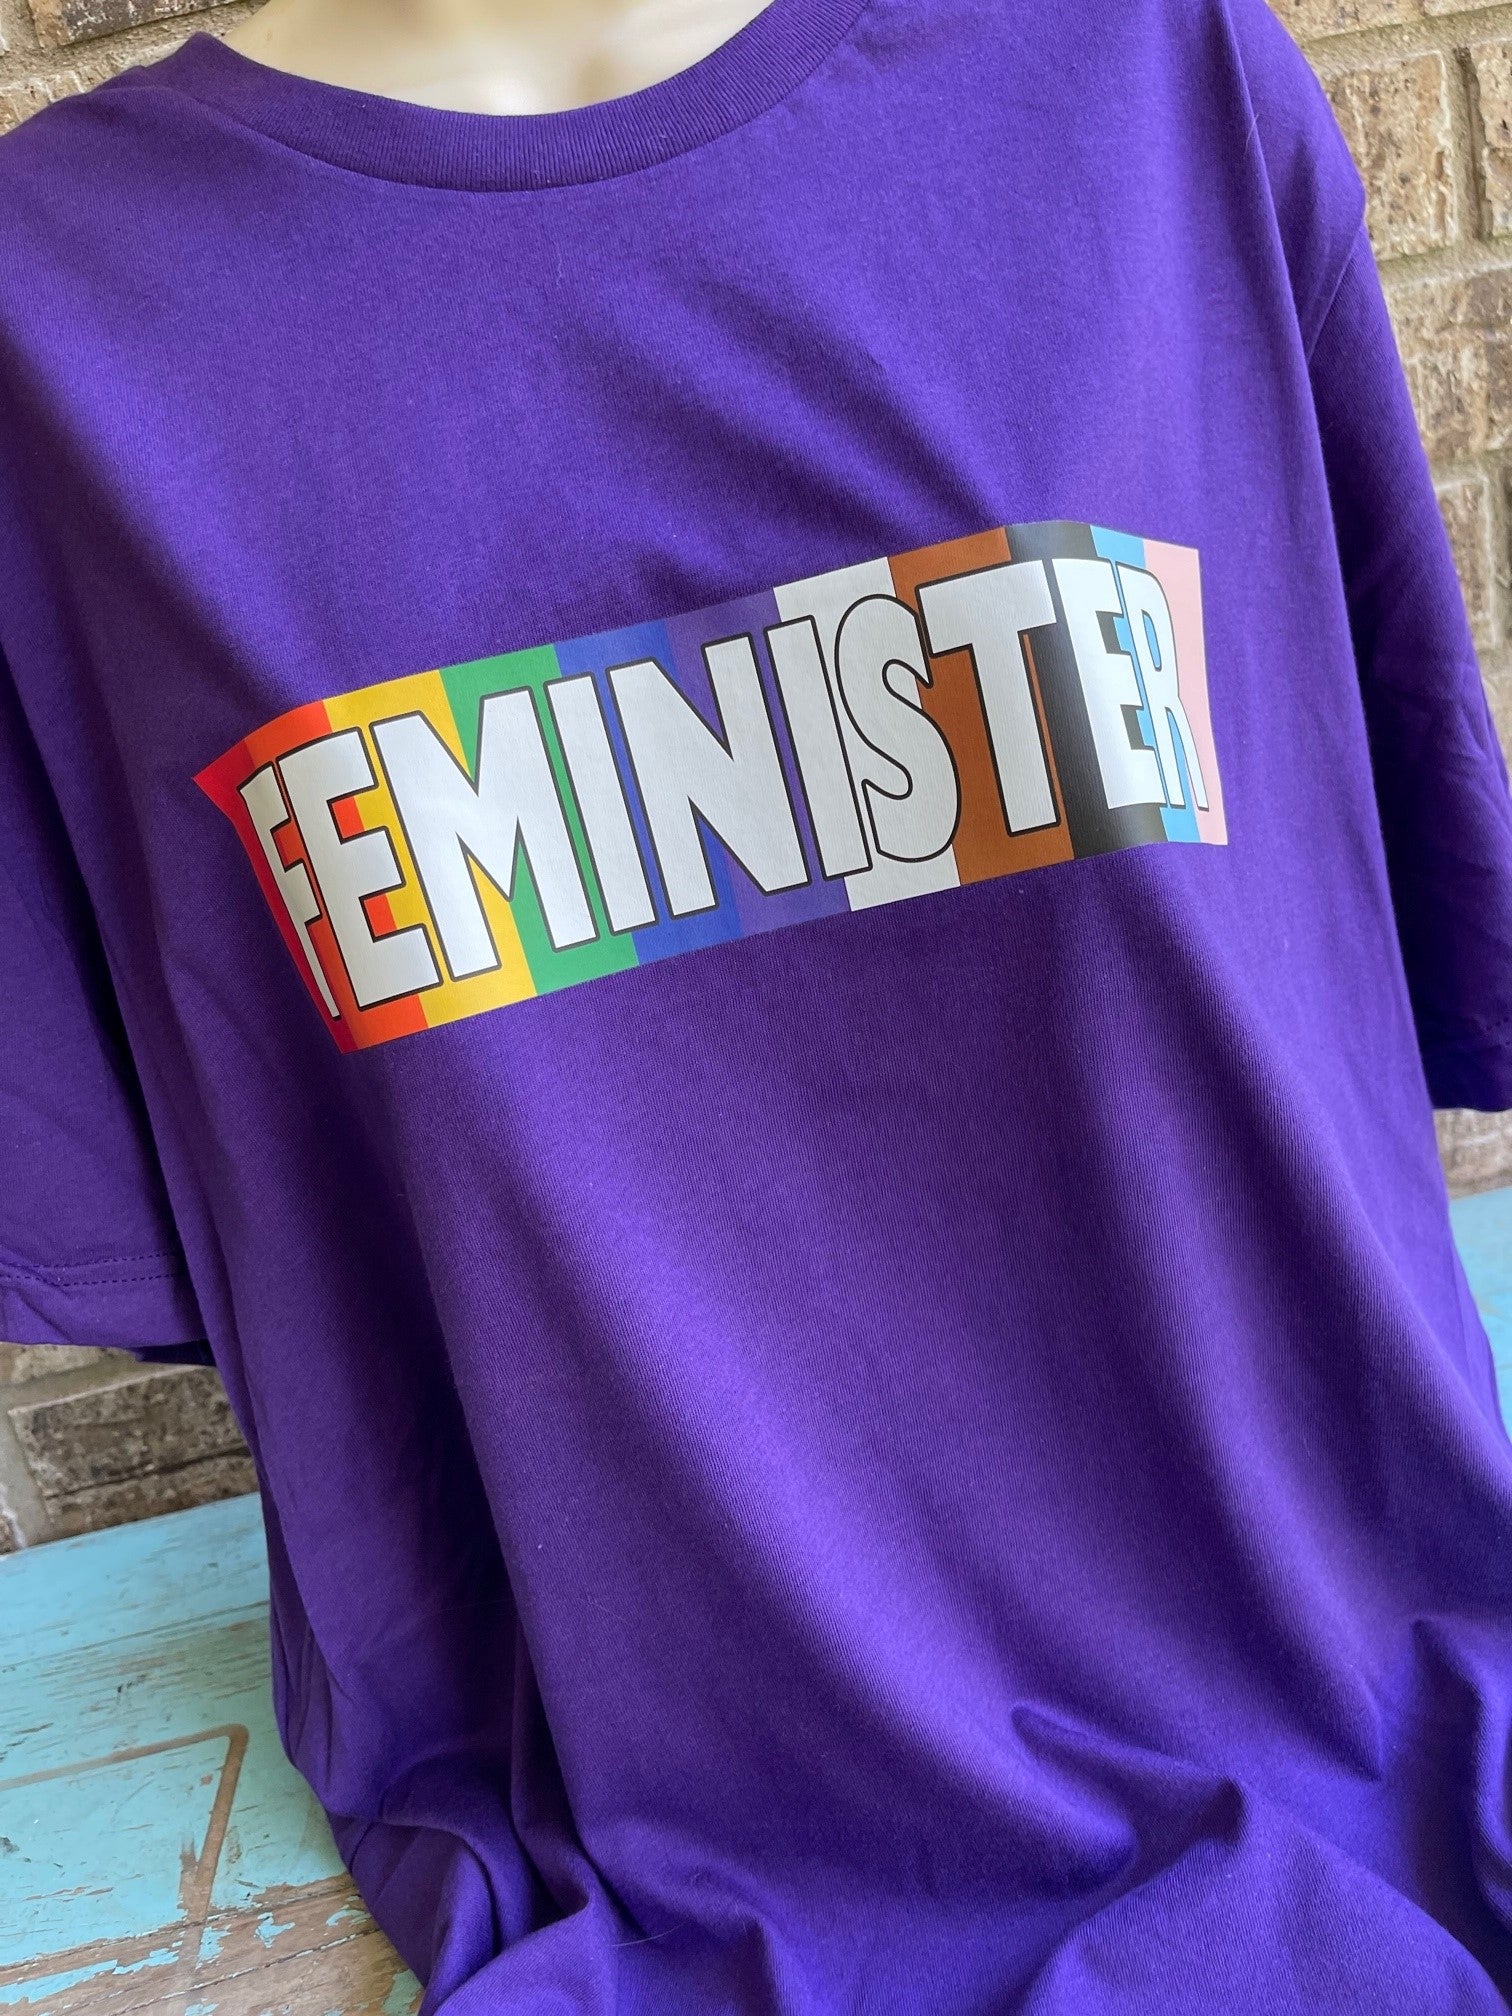 FEMINISTER Purple Tee - Shipping & Donation Included